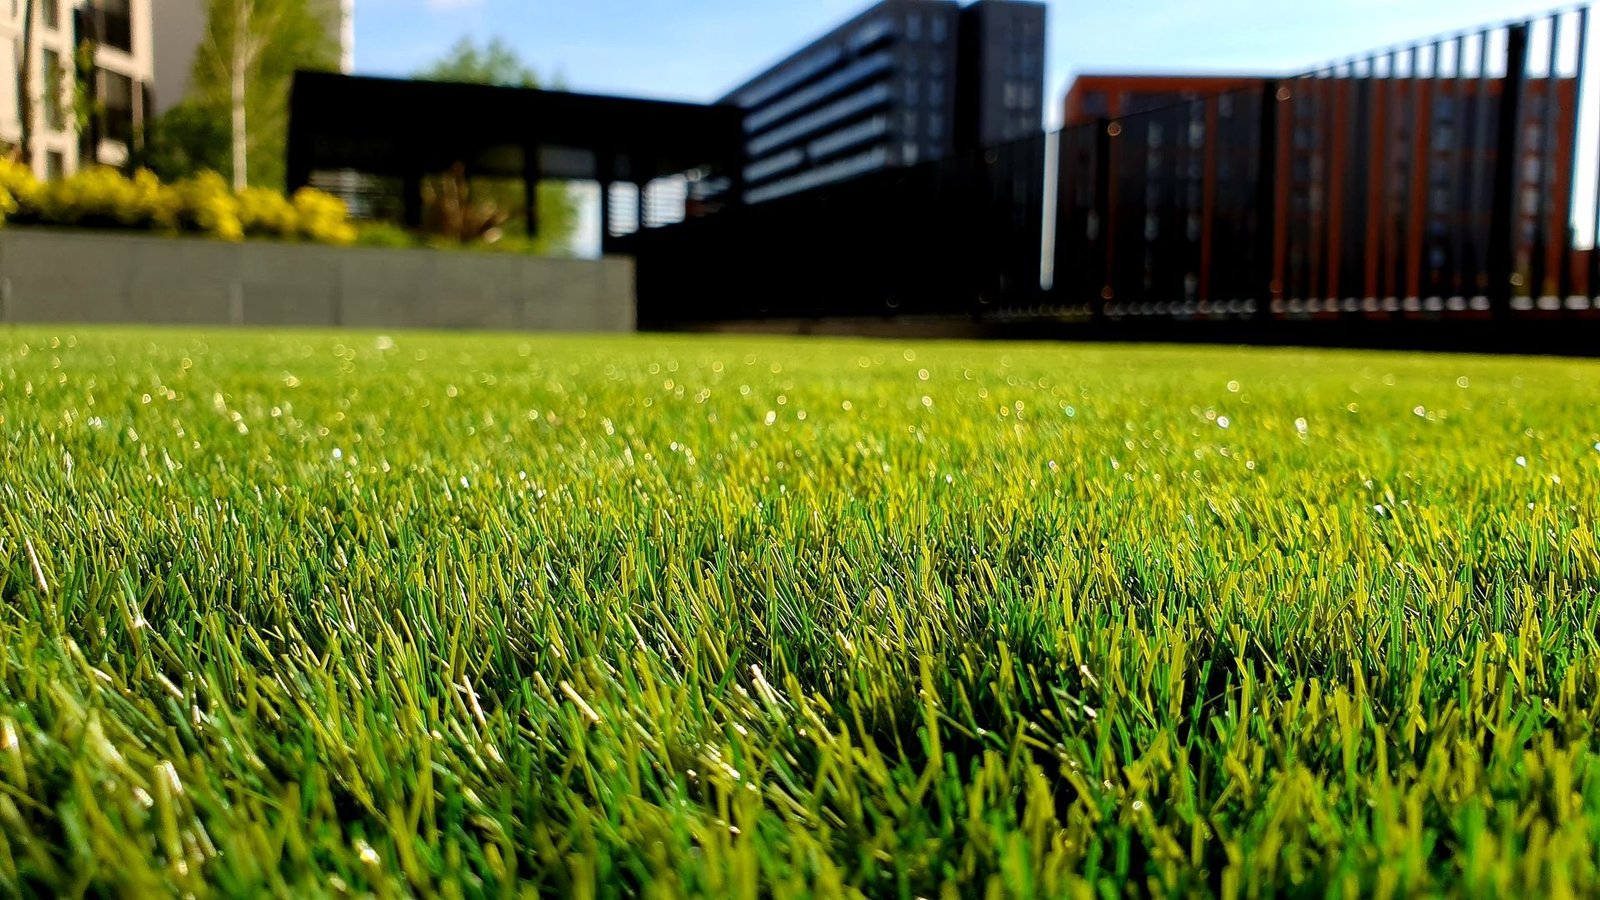 Close-up view of a lawn with lush green grass, ideal for residential applications. In the background, there are modern buildings and a black fence. The photo is taken from a low angle, emphasizing the texture of the grass and the vibrant, sunlit colors of the scene.